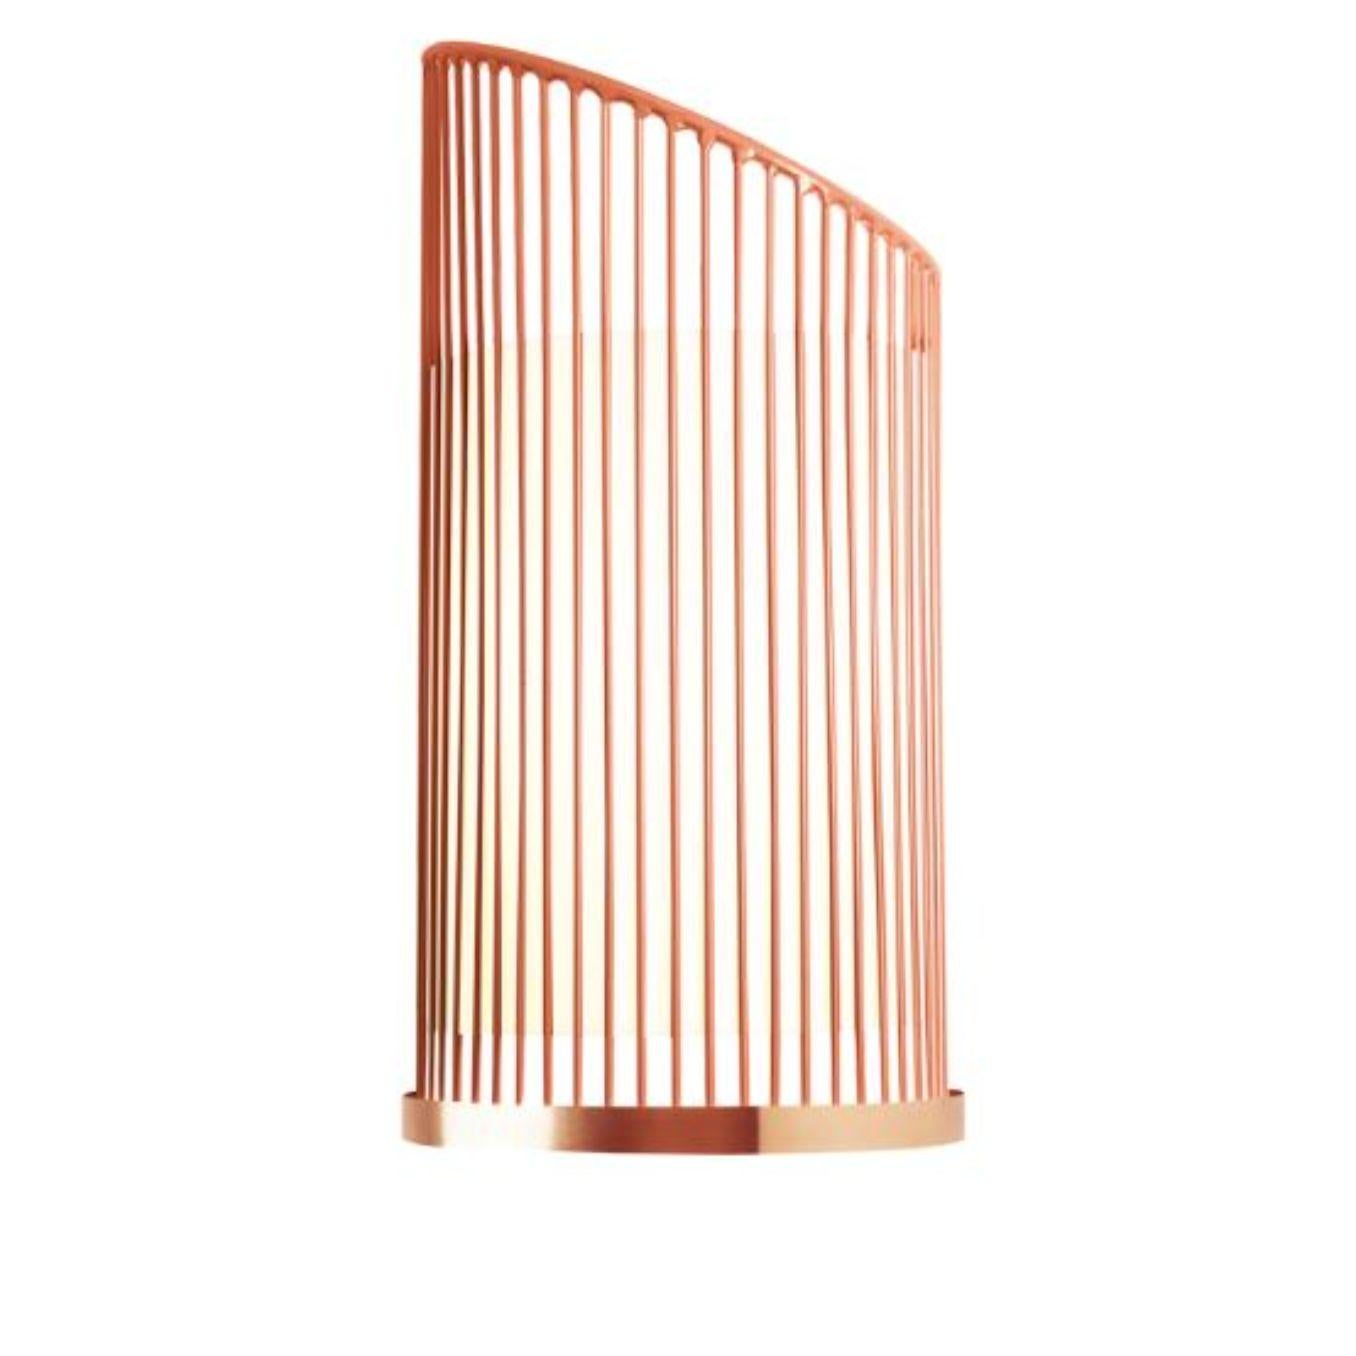 Salmon new spider wall lamp with copper ring by Dooq.
Dimensions: W 25x D 15x H 50cm.
Materials: lacquered metal, polished or brushed metal, copper.
abat-jour: cotton
Also available in different colors and